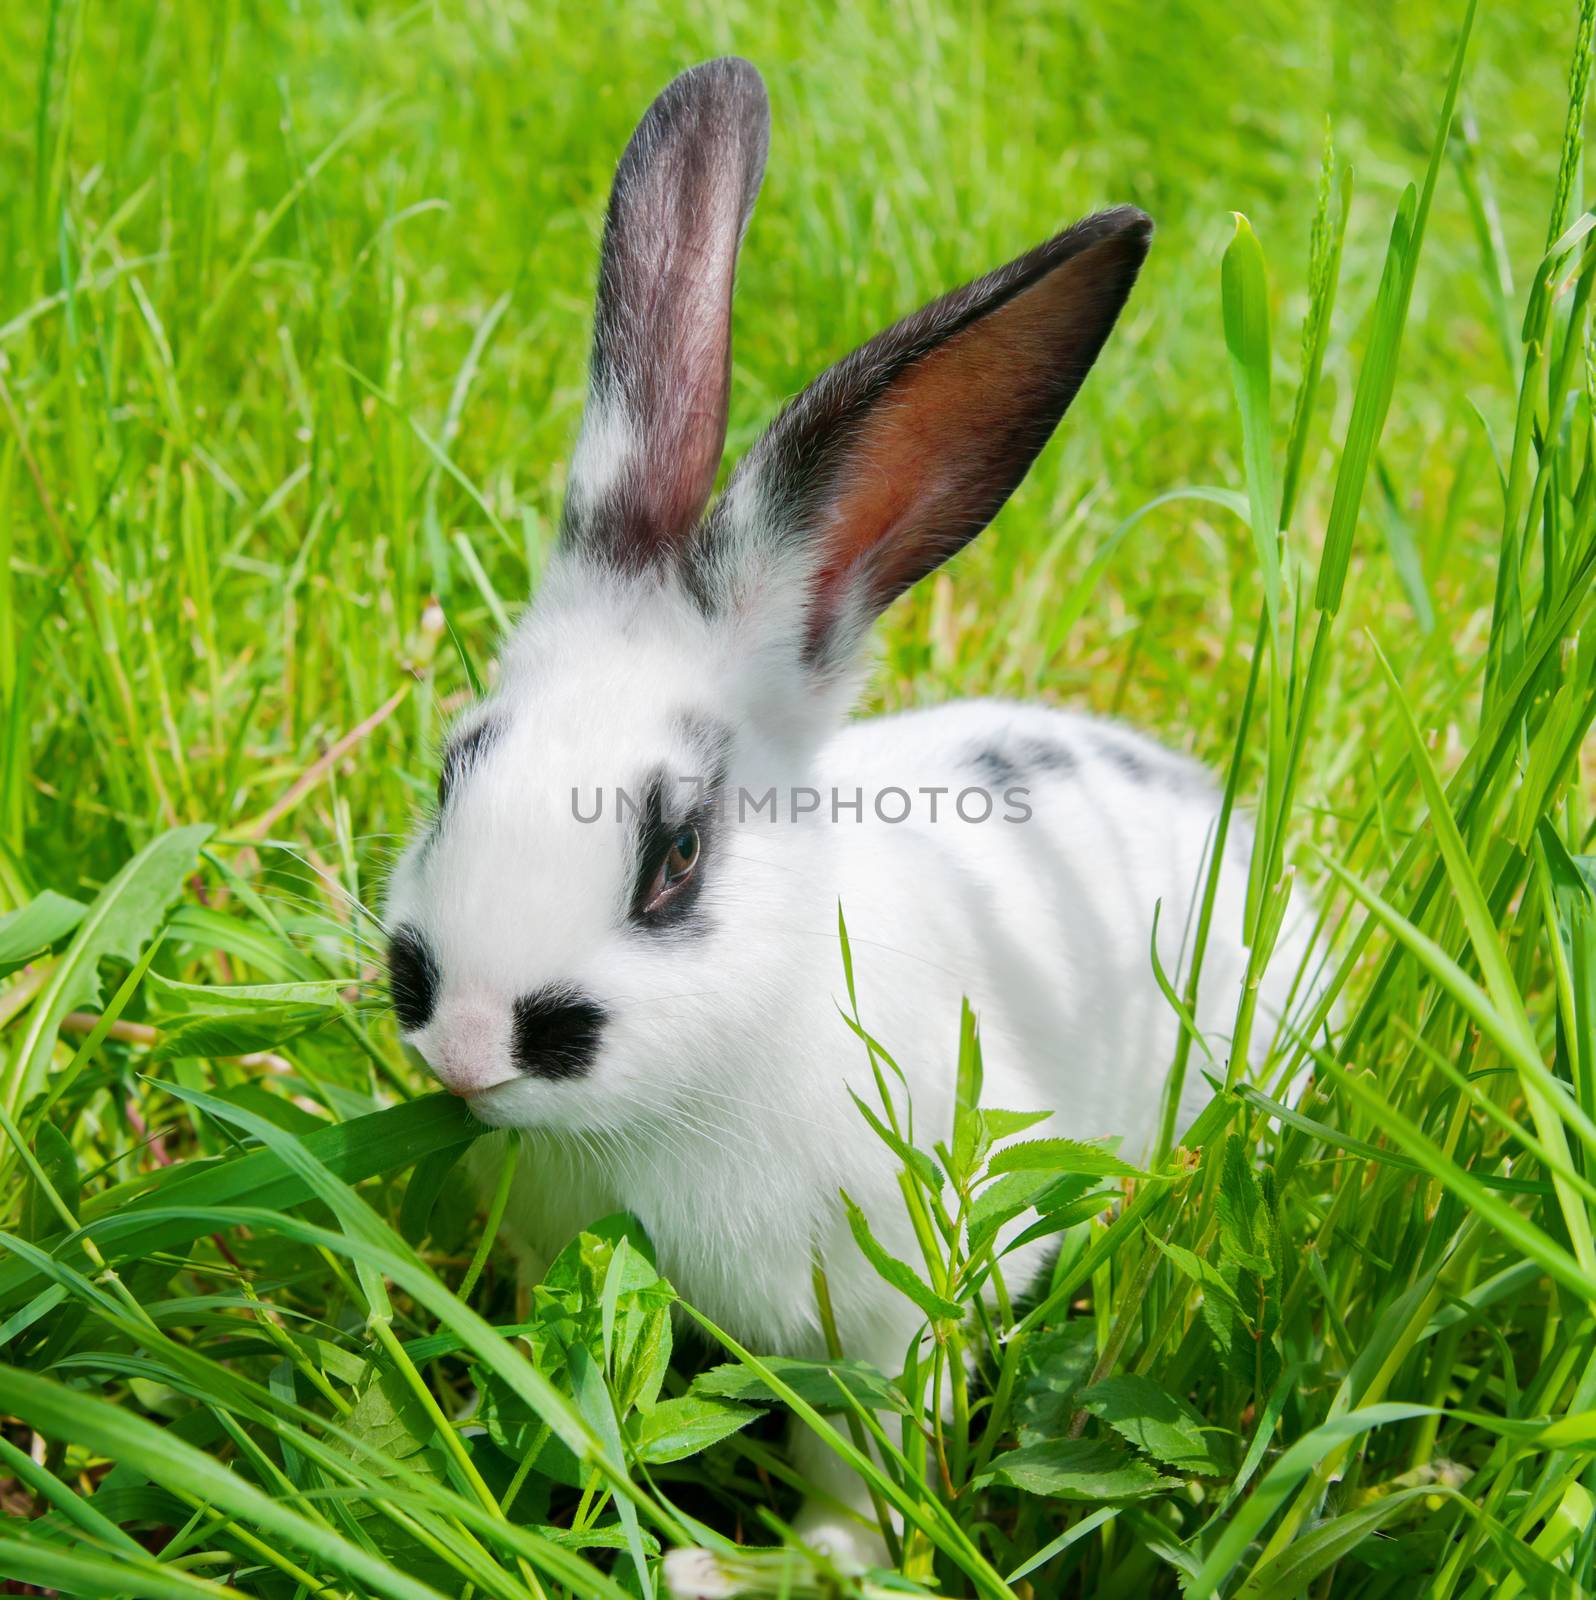 Rabbit sitting in grass, smiling at camera by zeffss